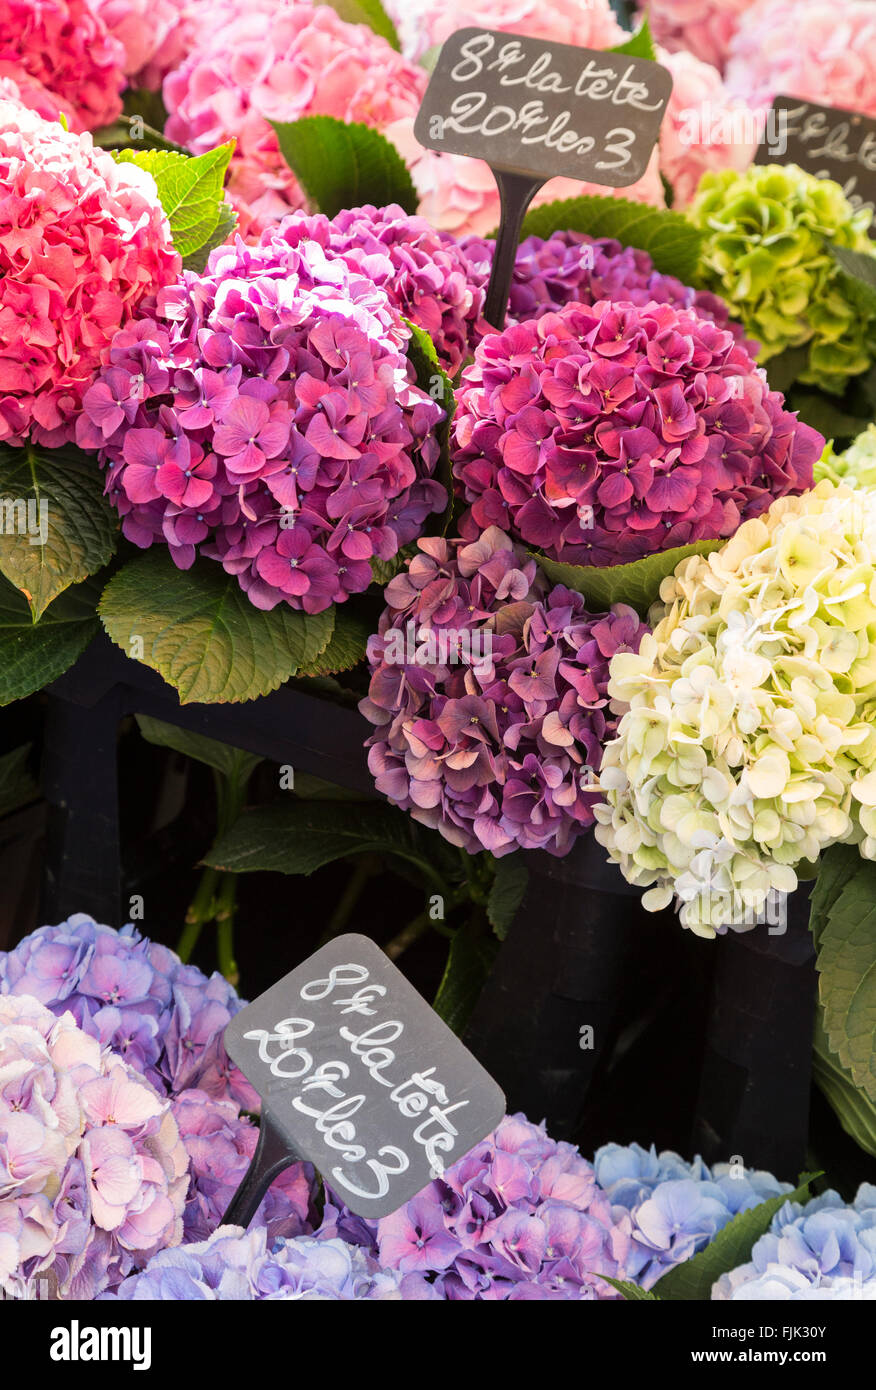 Colorful hydrangea flowers for sale at a local florist shop in Paris, France Stock Photo